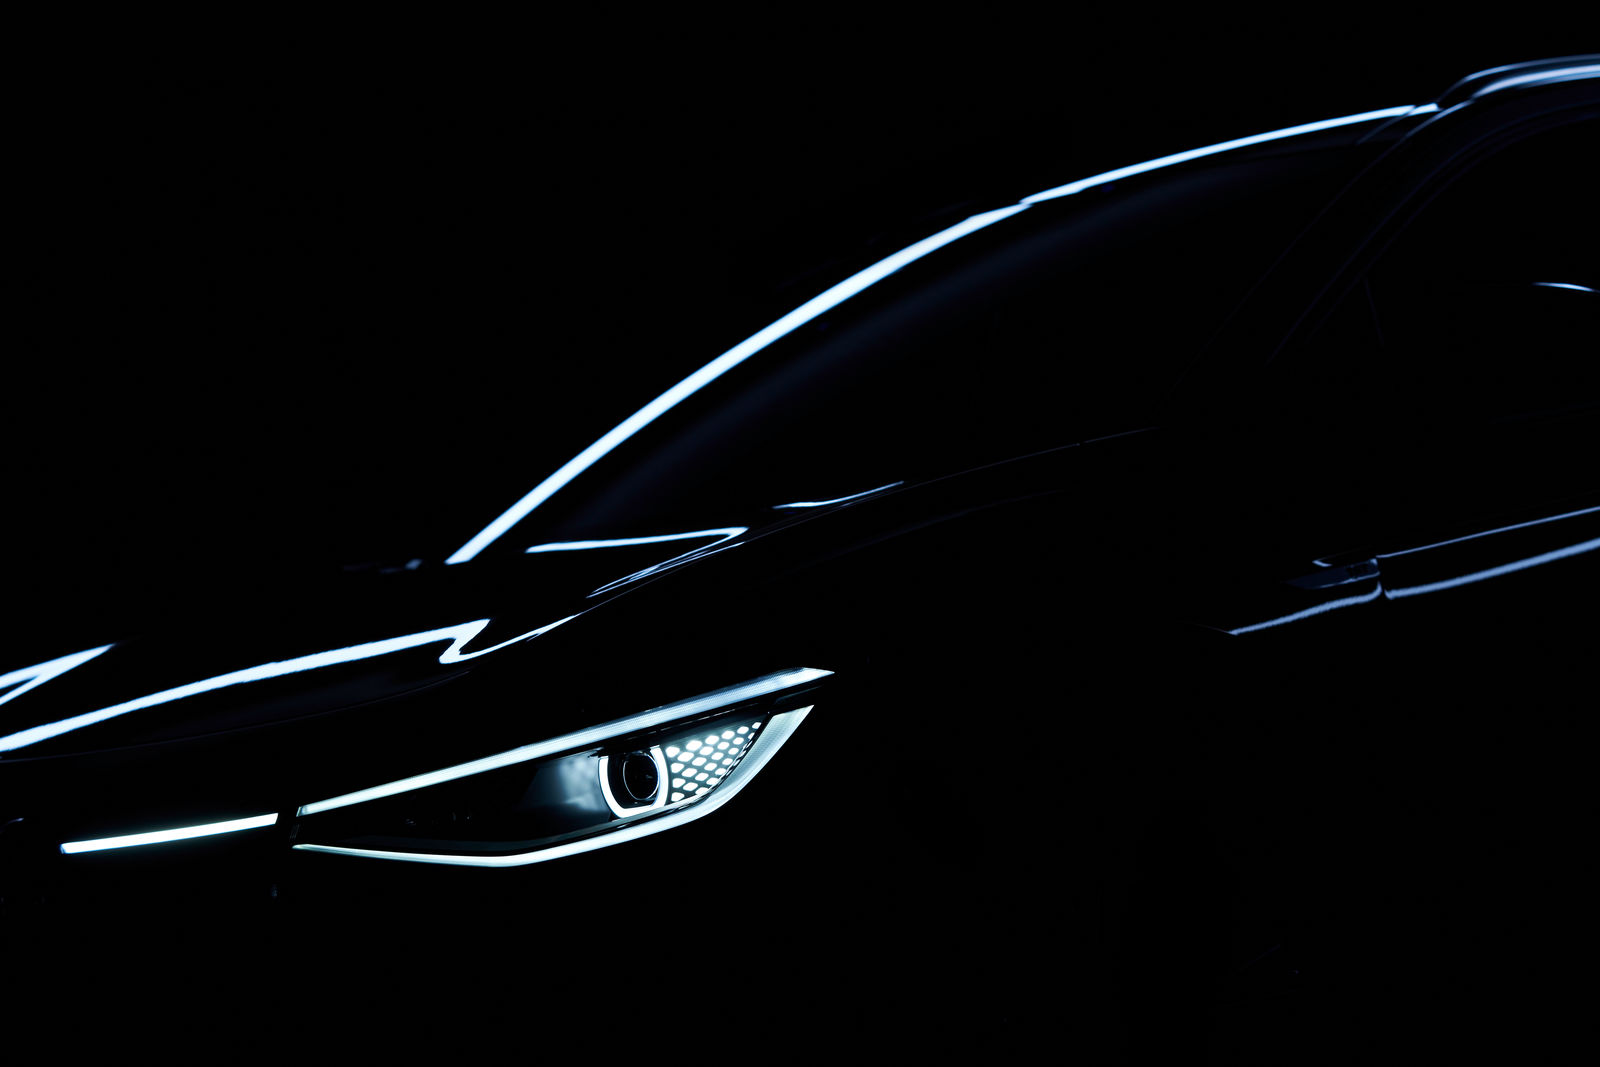 Story: "Electric, clean, SUV – ID.4 prior to the world premiere"